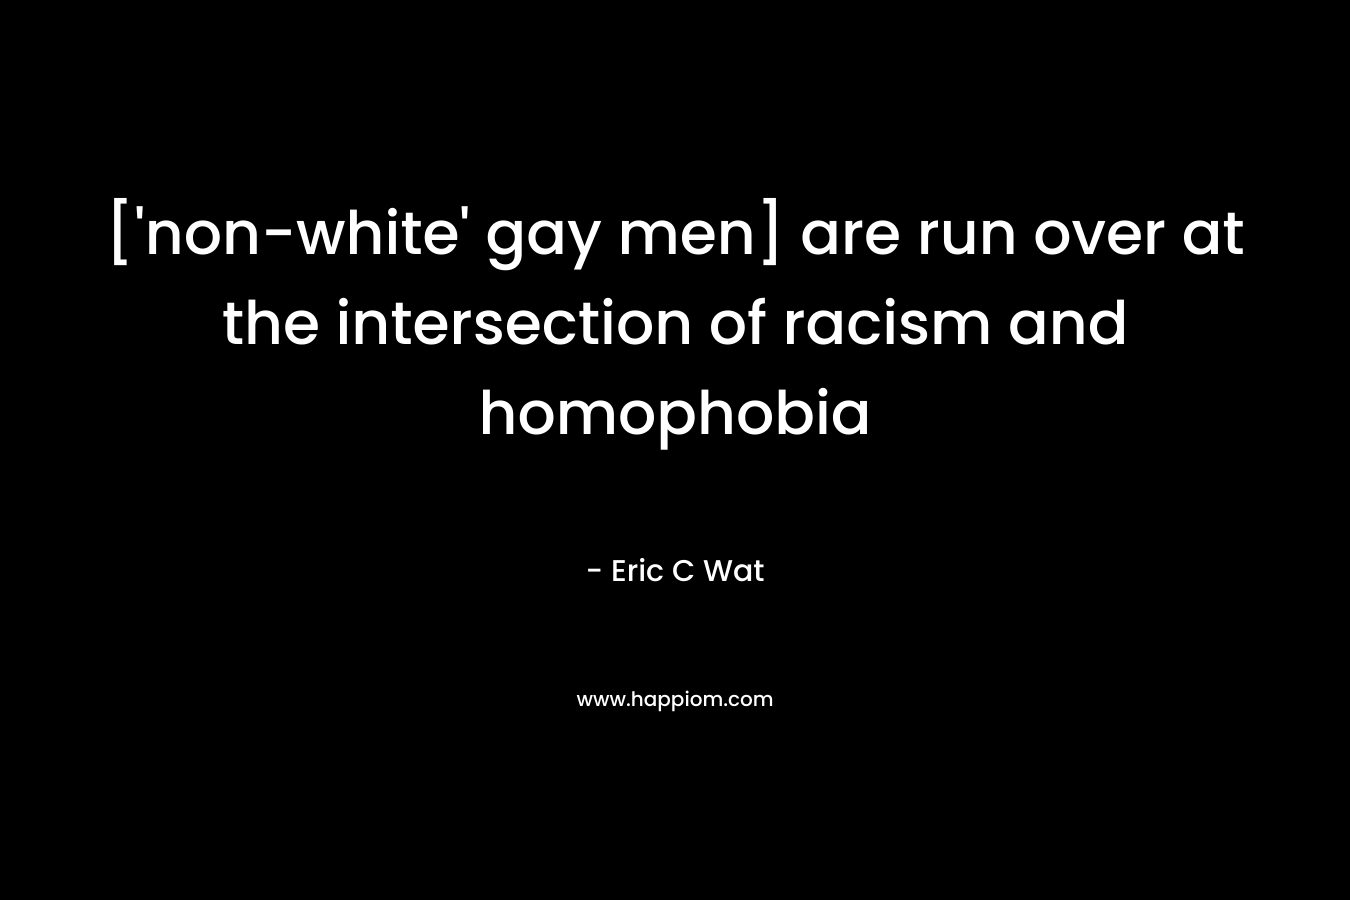 [‘non-white’ gay men] are run over at the intersection of racism and homophobia – Eric C Wat